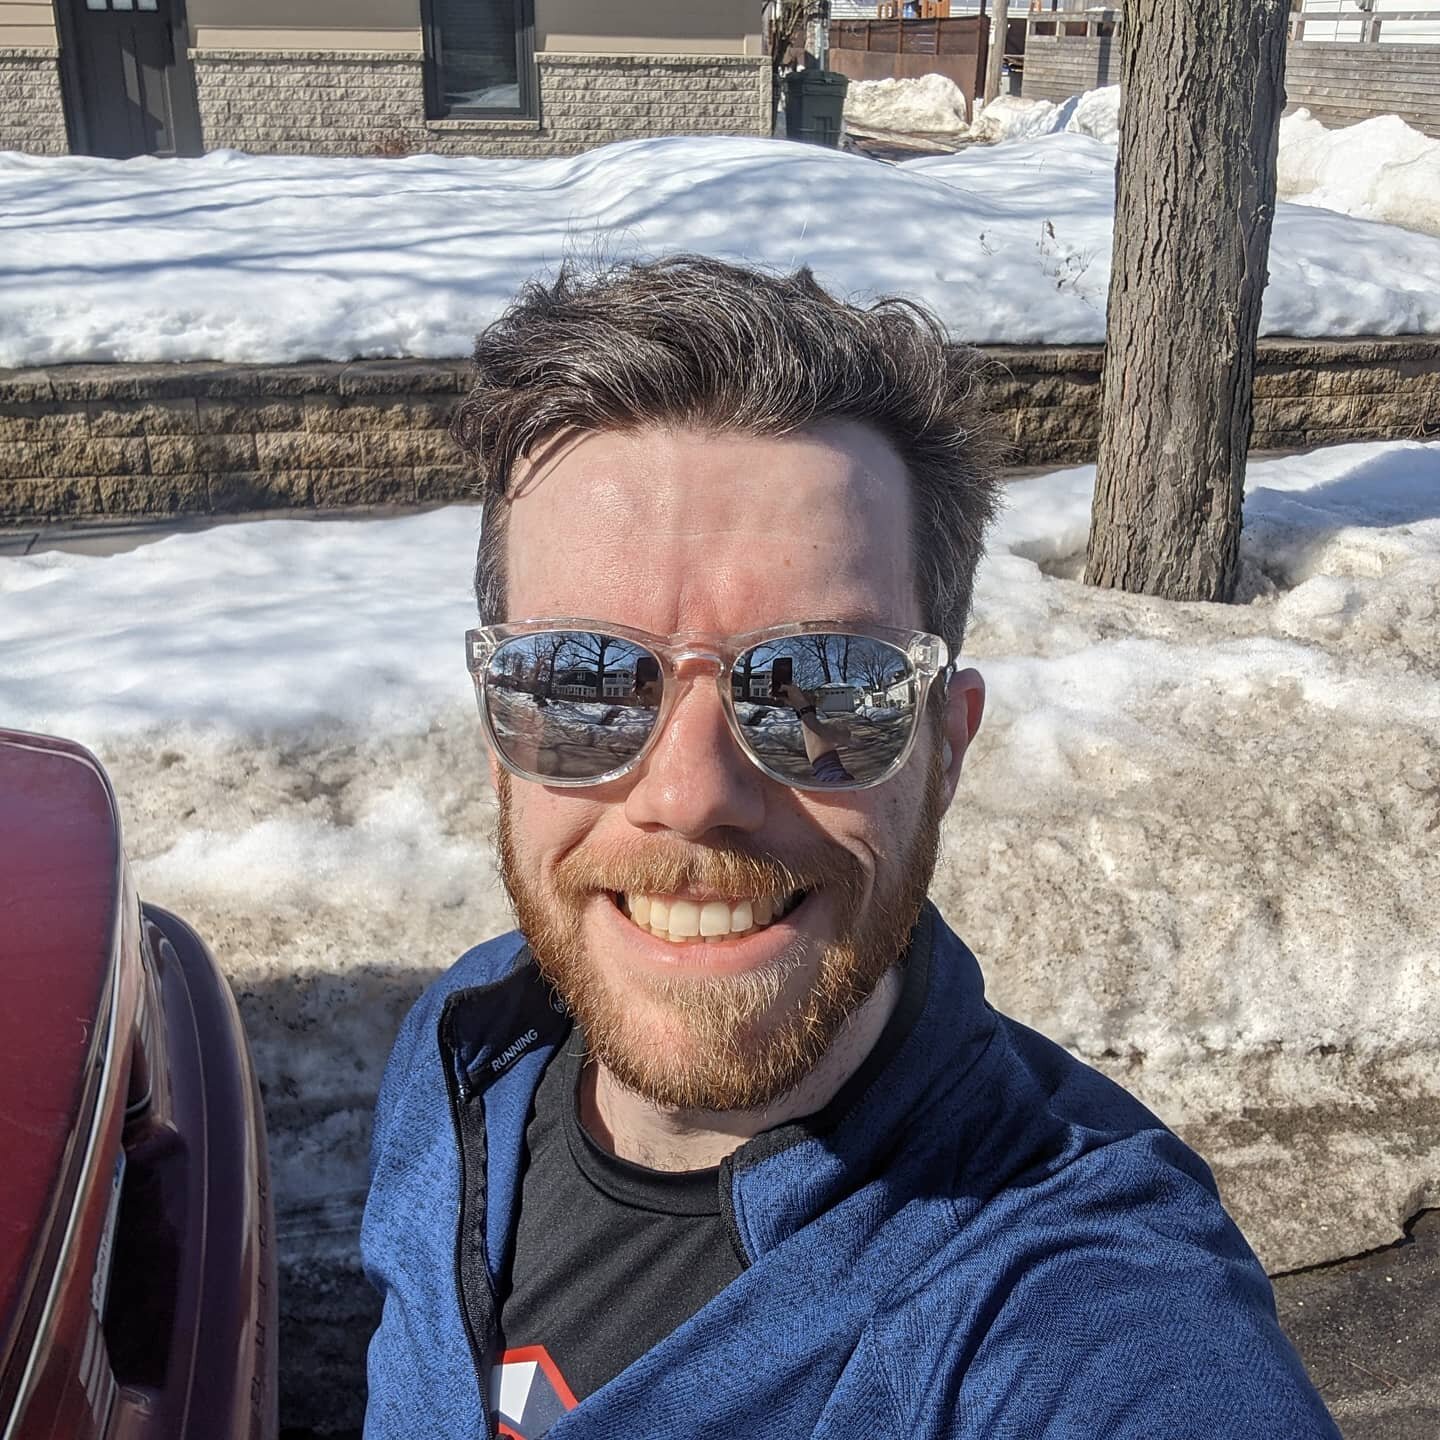 Took a break from the bike this winter and started running while I was in school. I have been slowly working my way up to a 10k race for Earth Day.

I am planning to raise money for an environmental protection group in celebration of Earth Day. Keep 